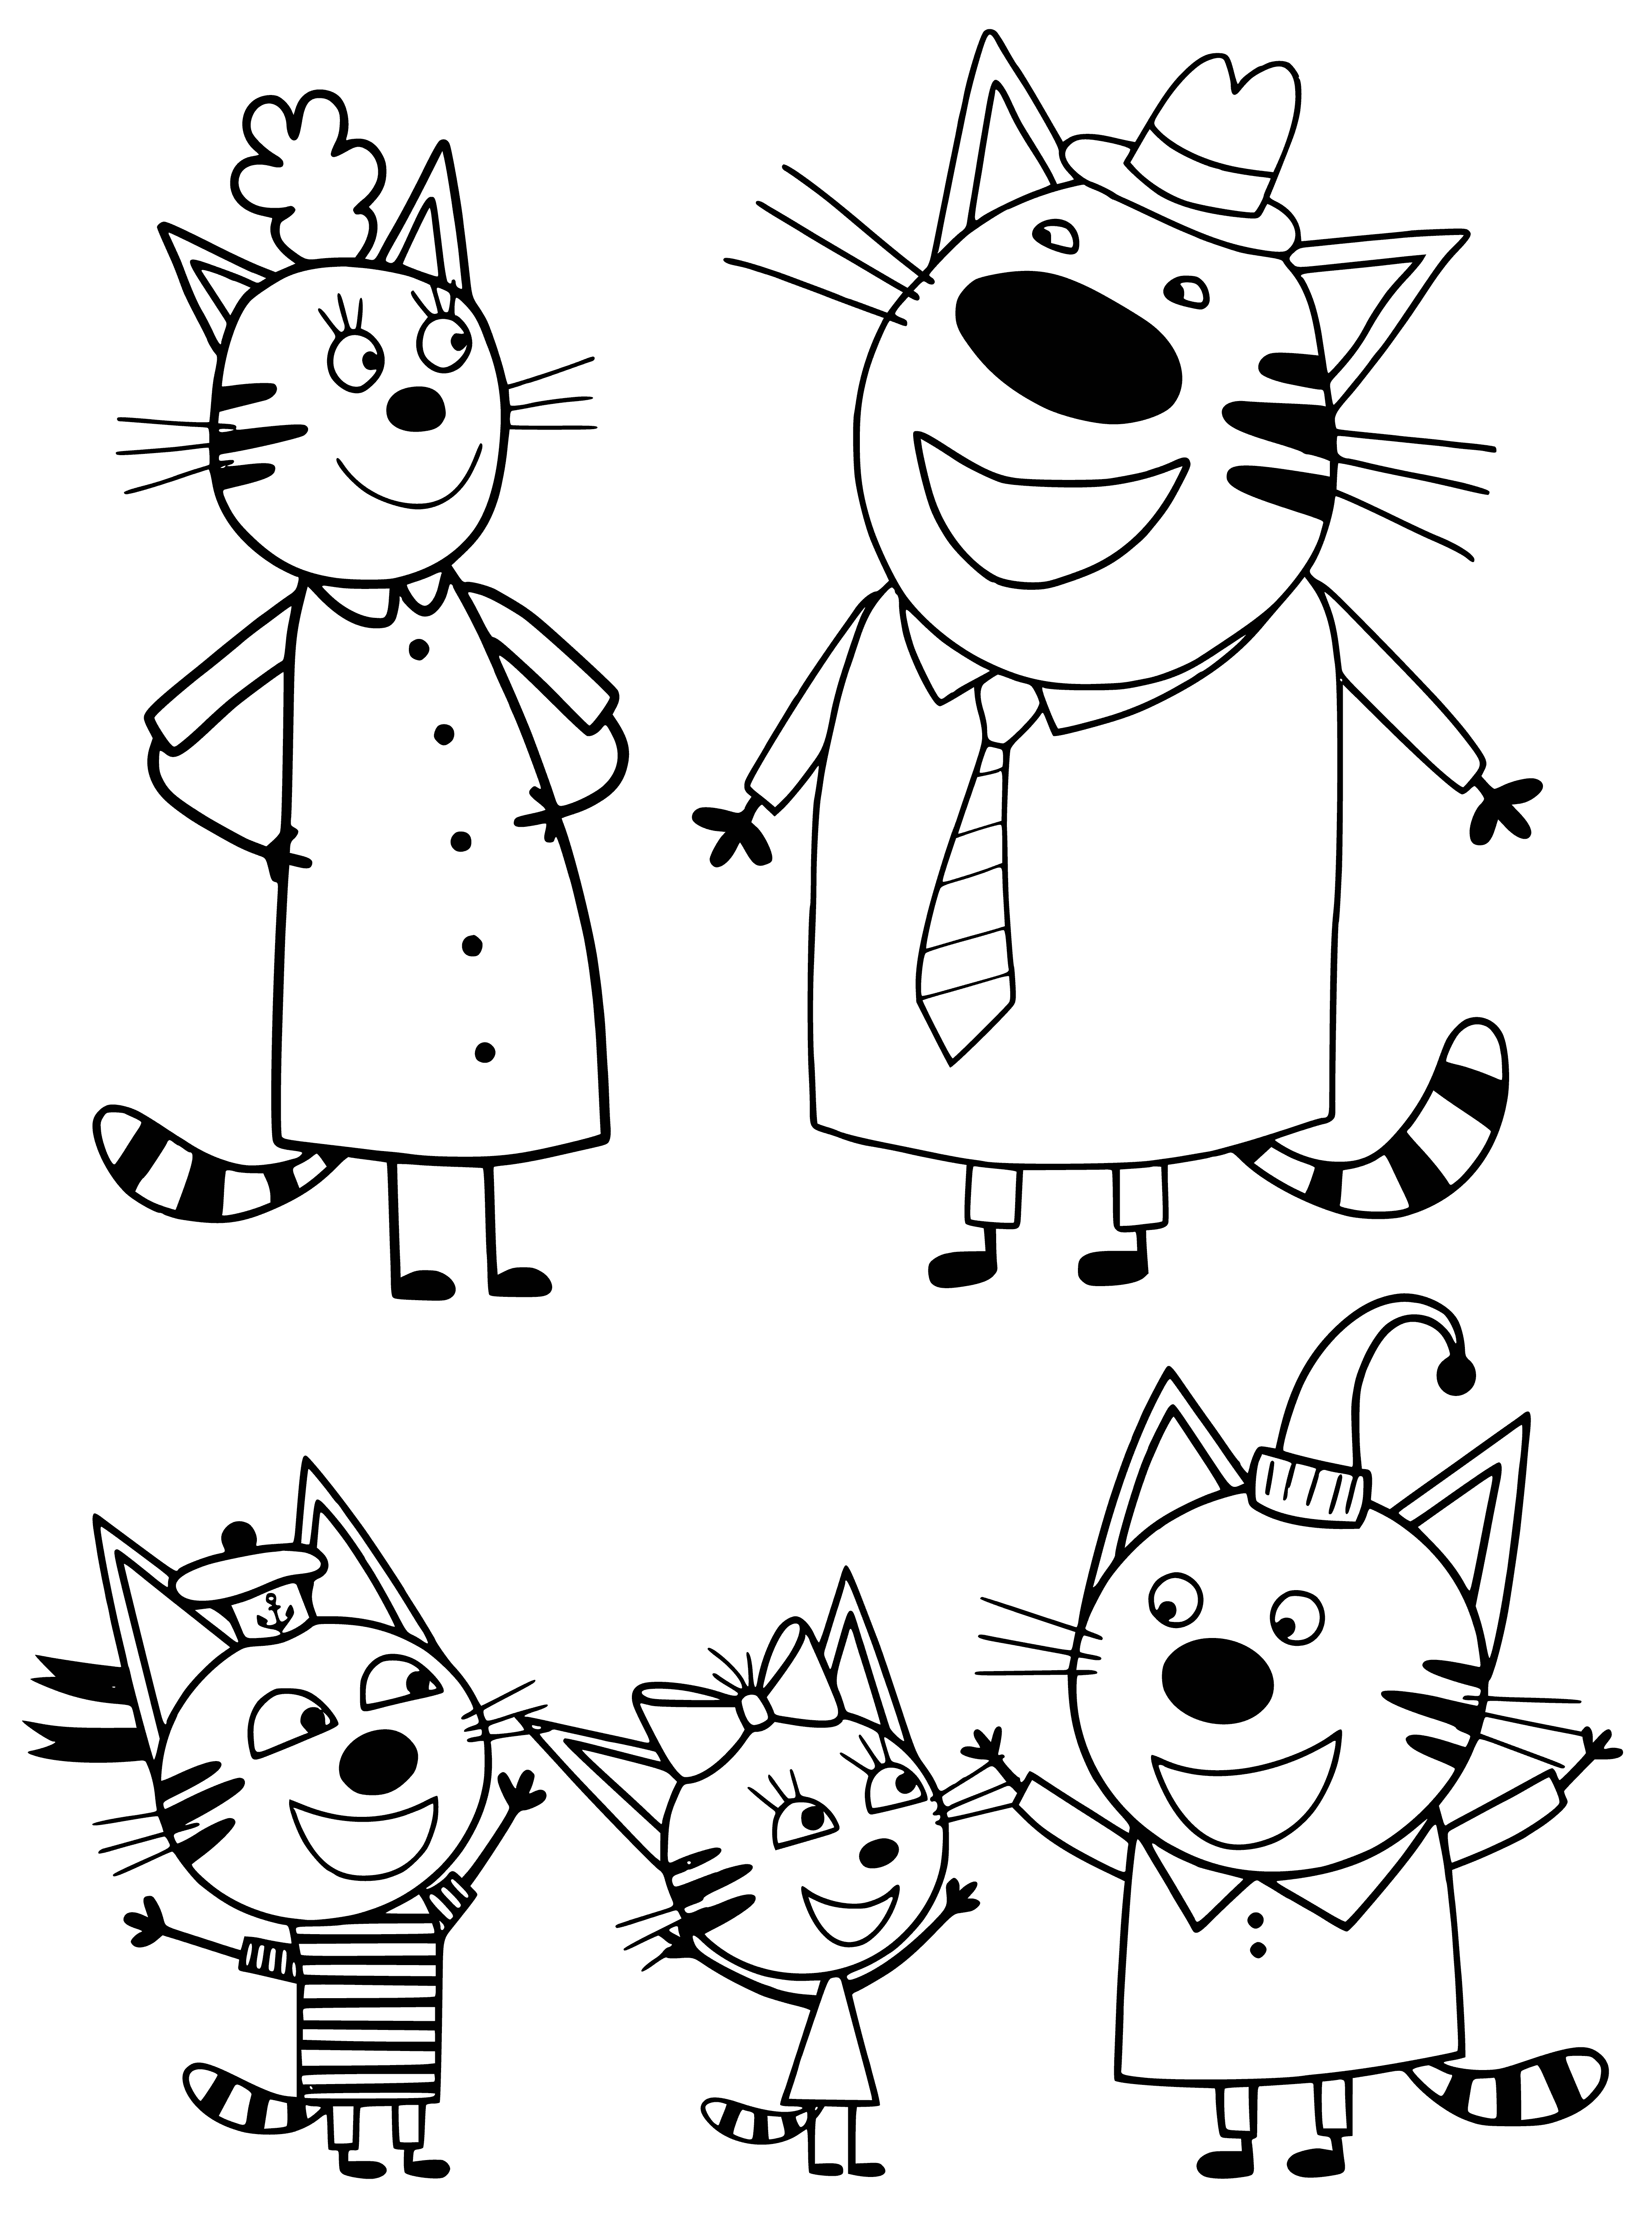 coloring page: 3 cats - 1 larger than the other 2, all have mouths open and 2 are sitting, 1 is standing.